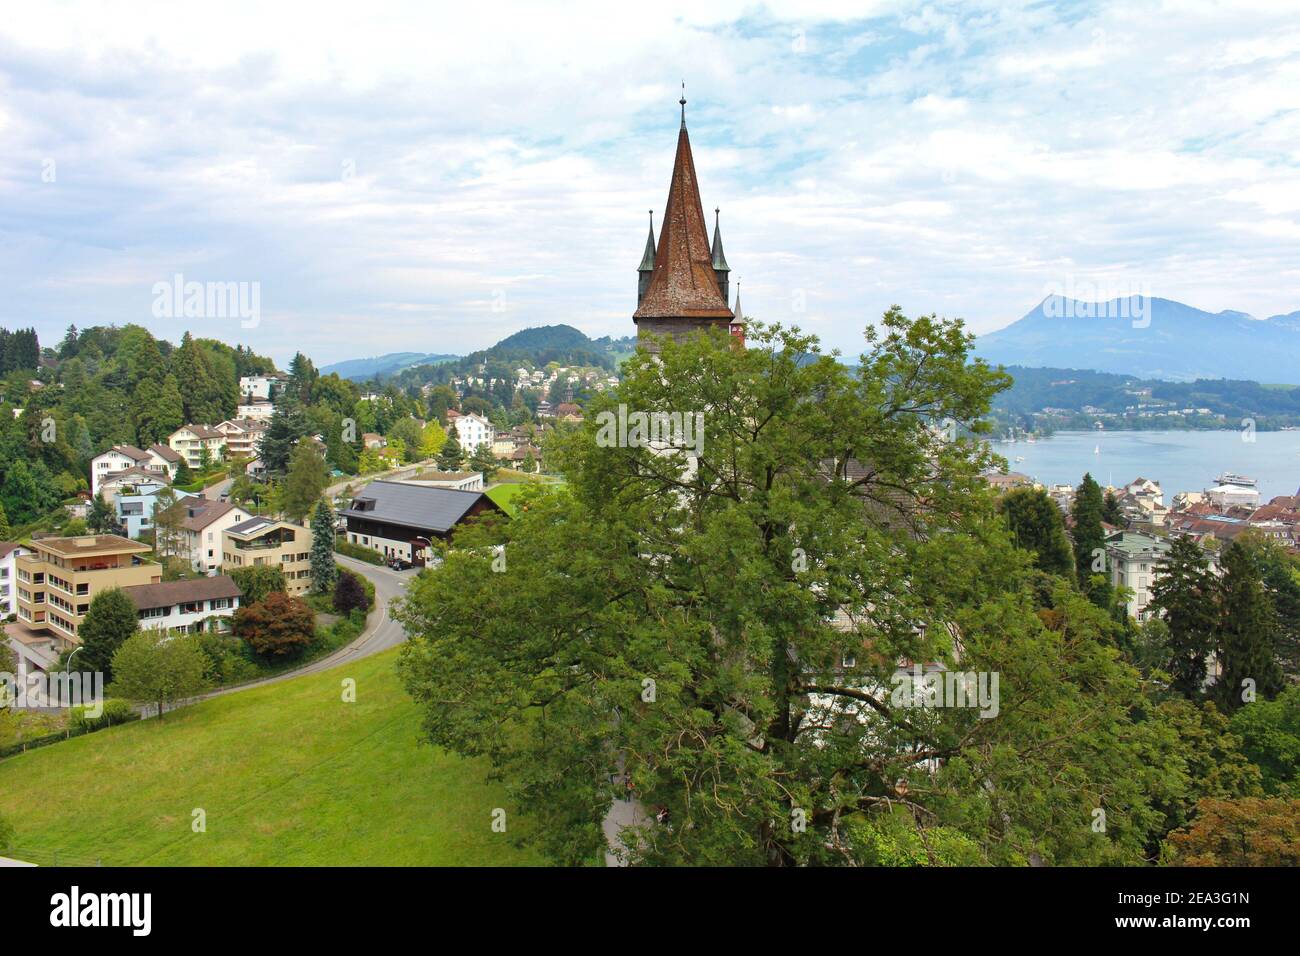 Luzern, view from a wall Stock Photo